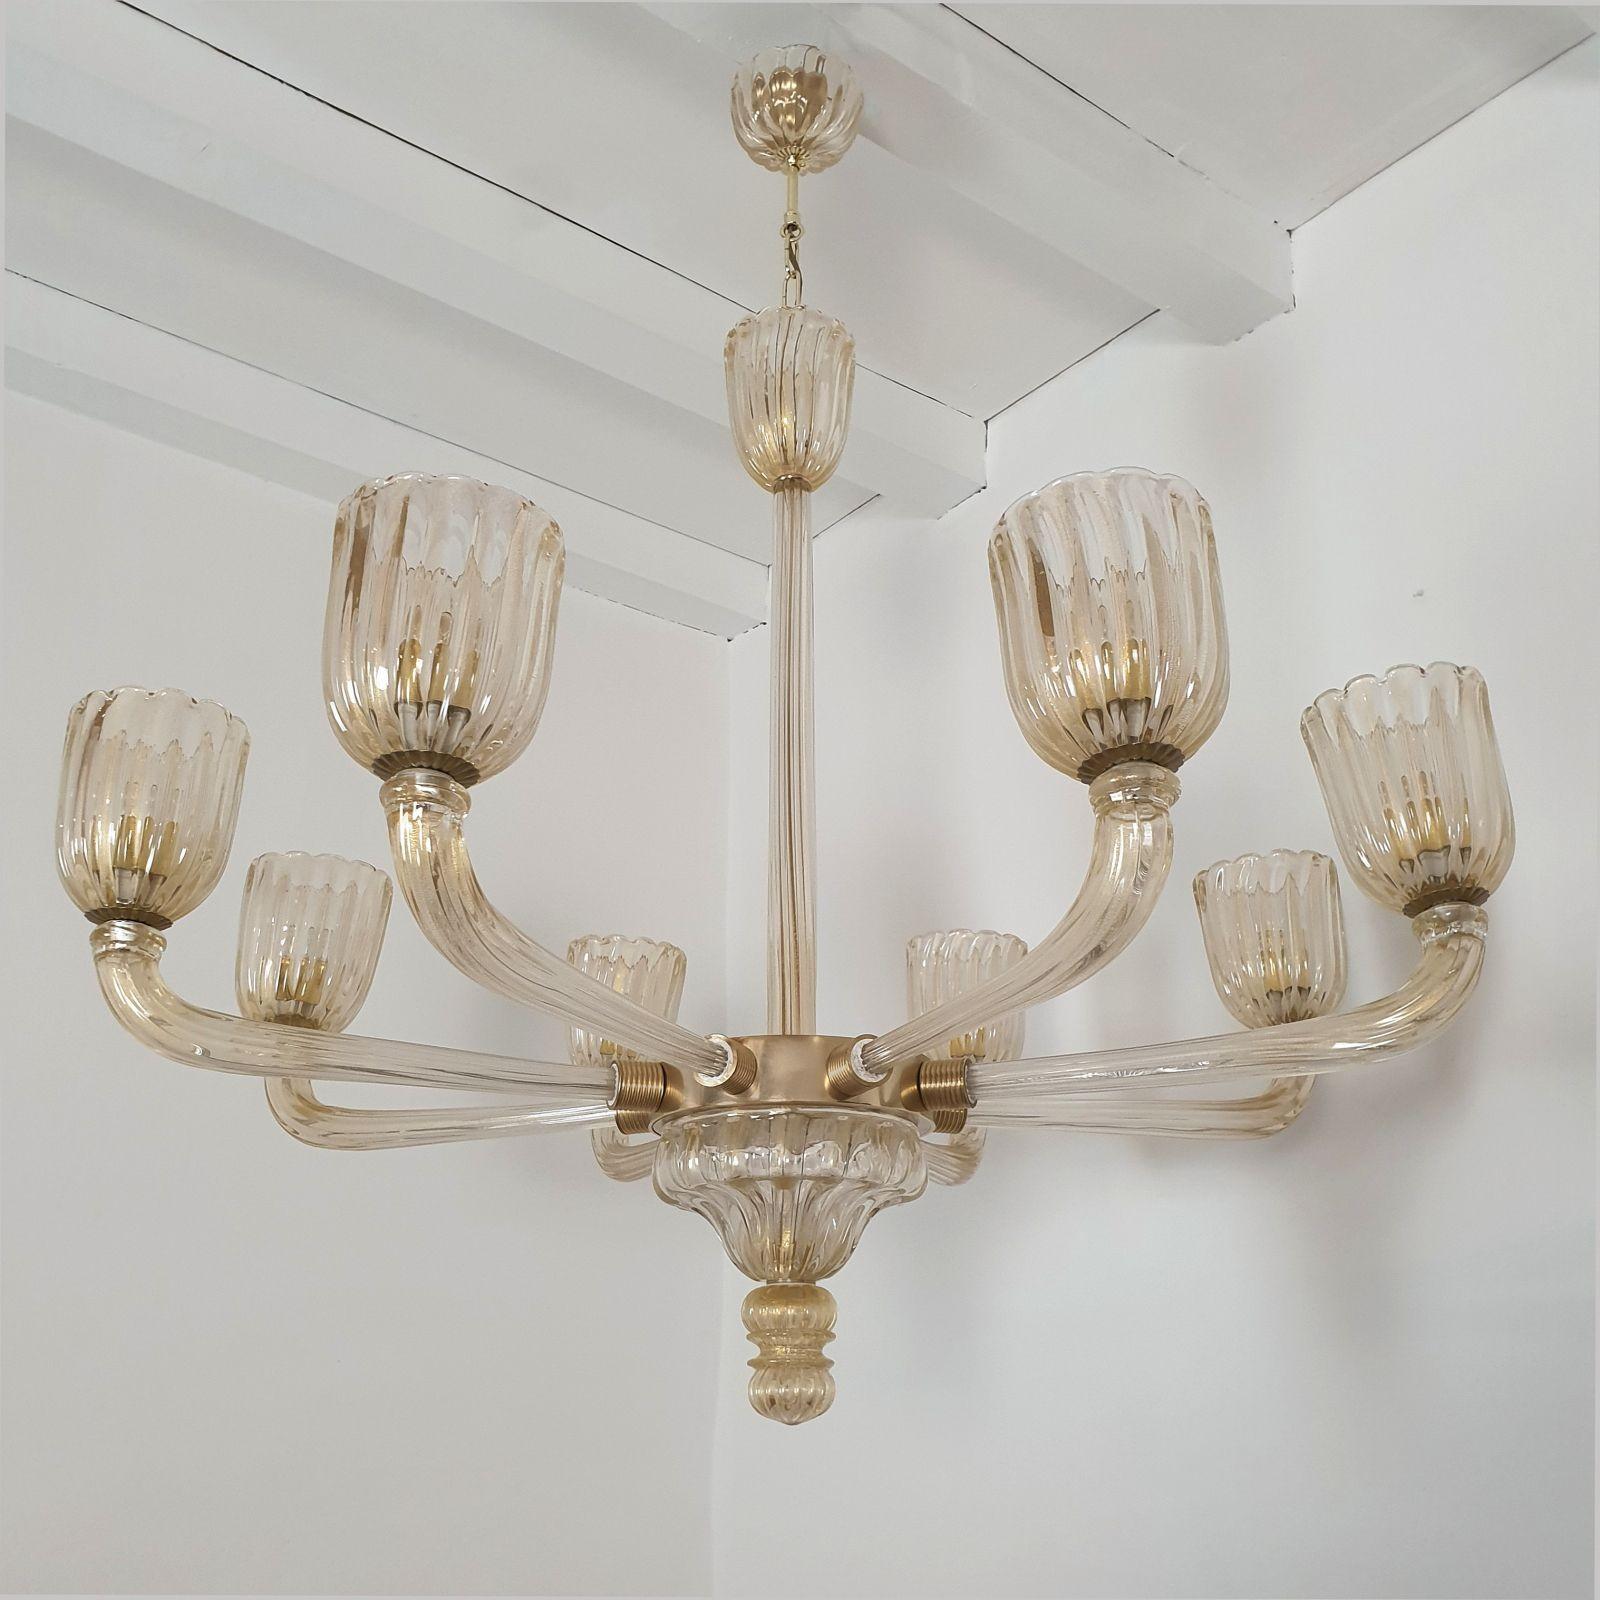 Large Mid Century Modern hand-blown Murano glass chandelier, attributed to Barovier, Italy 1970s.
The Murano glass is thick, clear with real 24 carats gold flakes inclusion.
It make the glass translucent, and give a warm glow of light.
The mounts